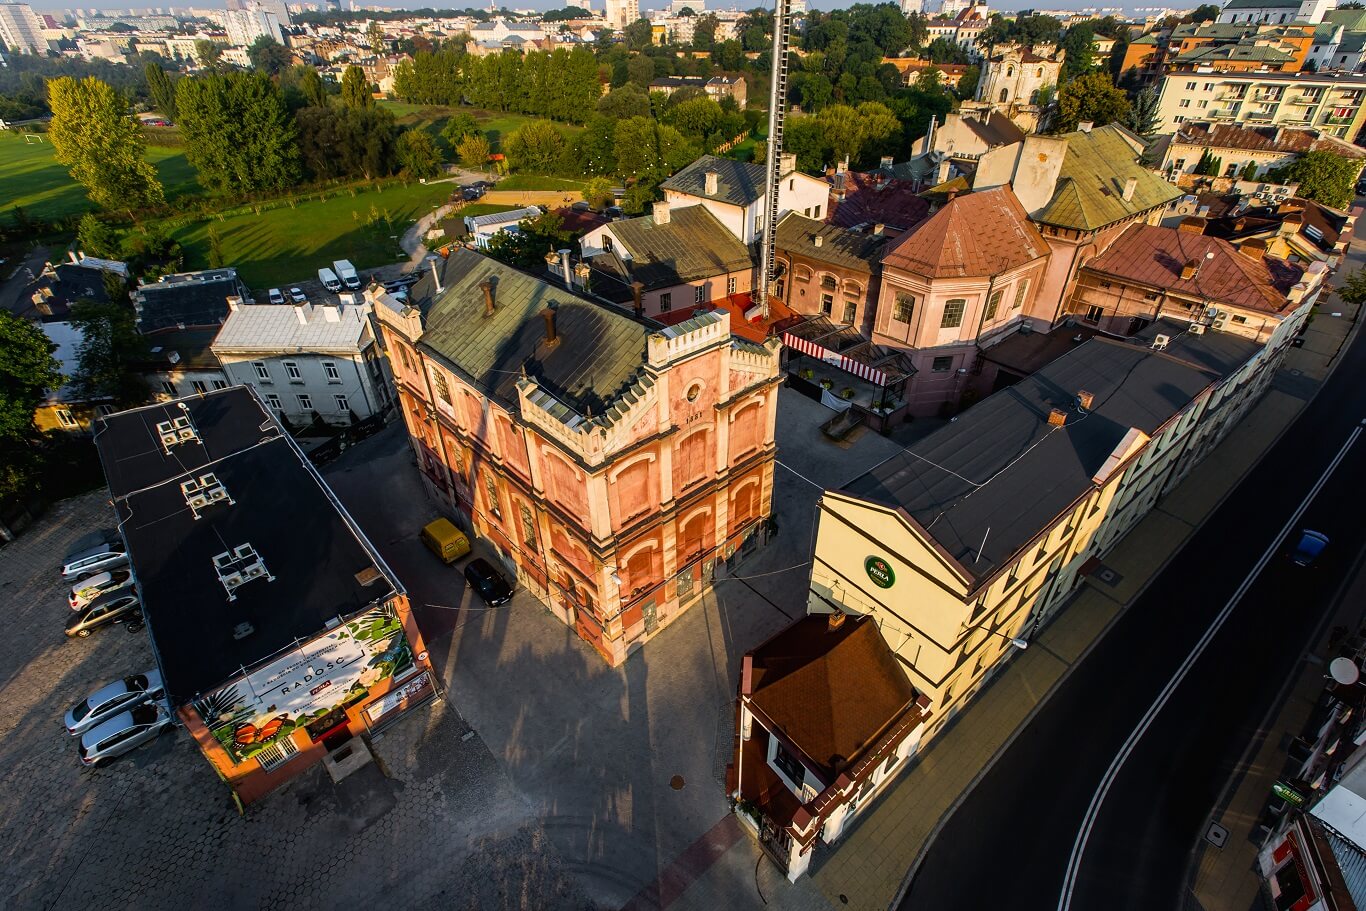 The Perła Brewery